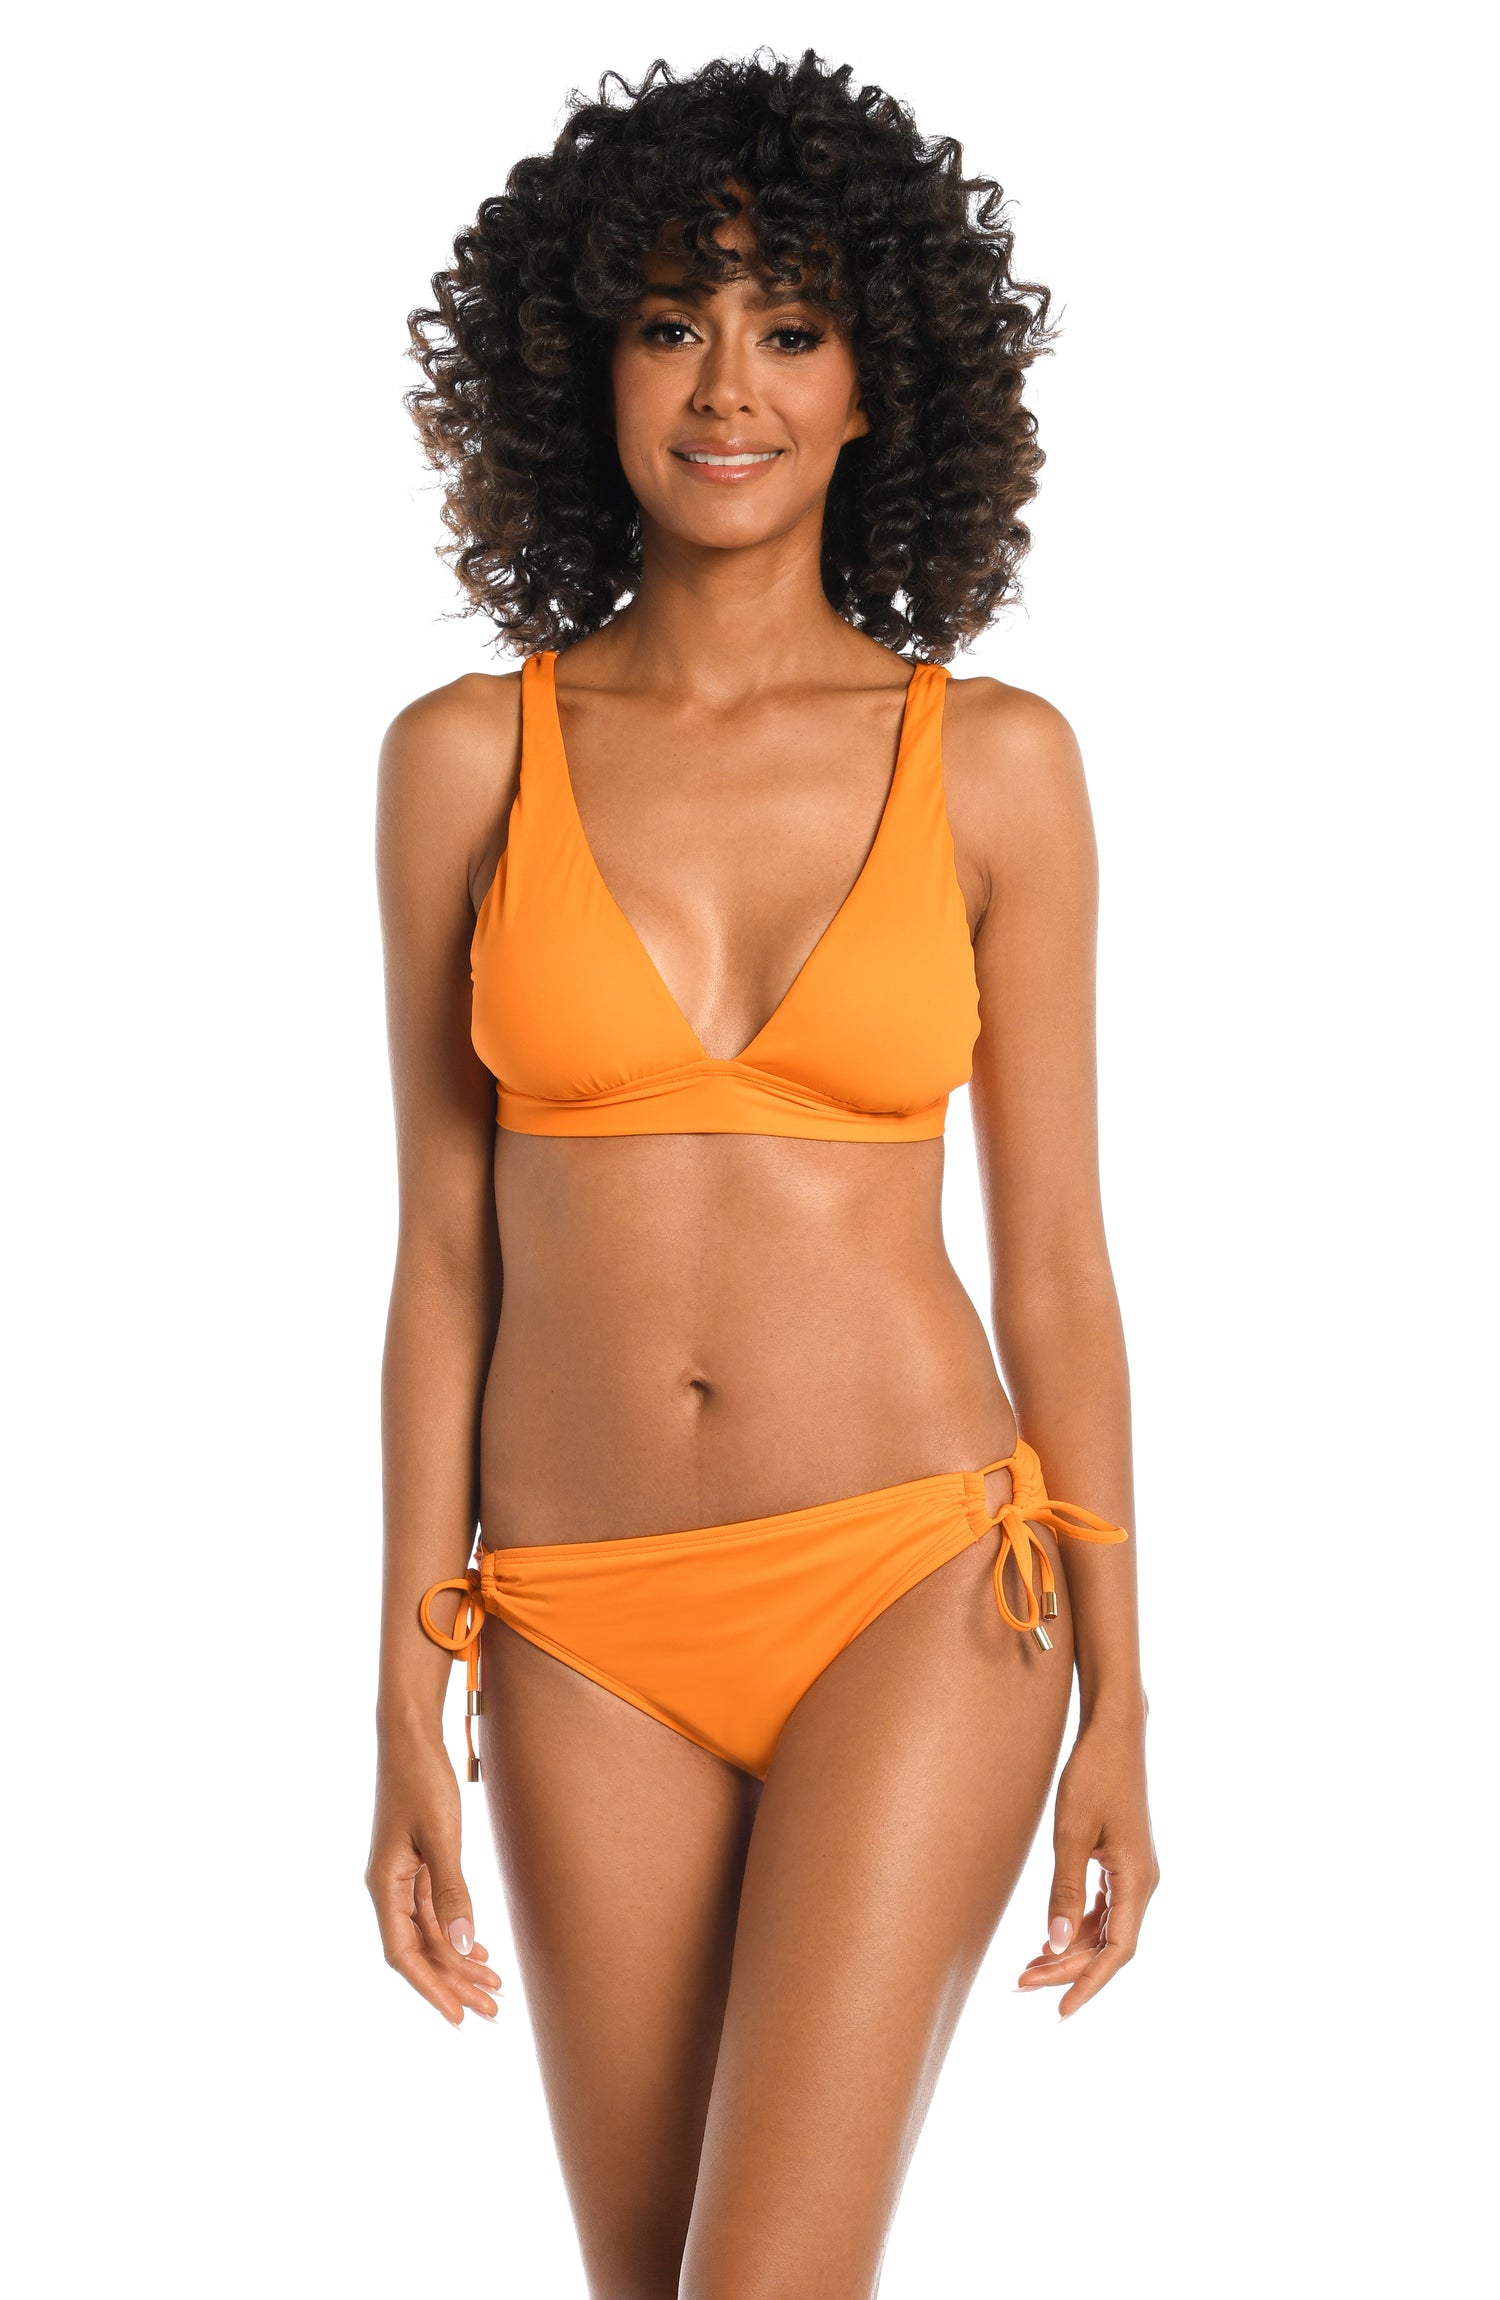 Model is wearing a tangerine colored over the shoulder swimsuit top from our Best-Selling Island Goddess collection.